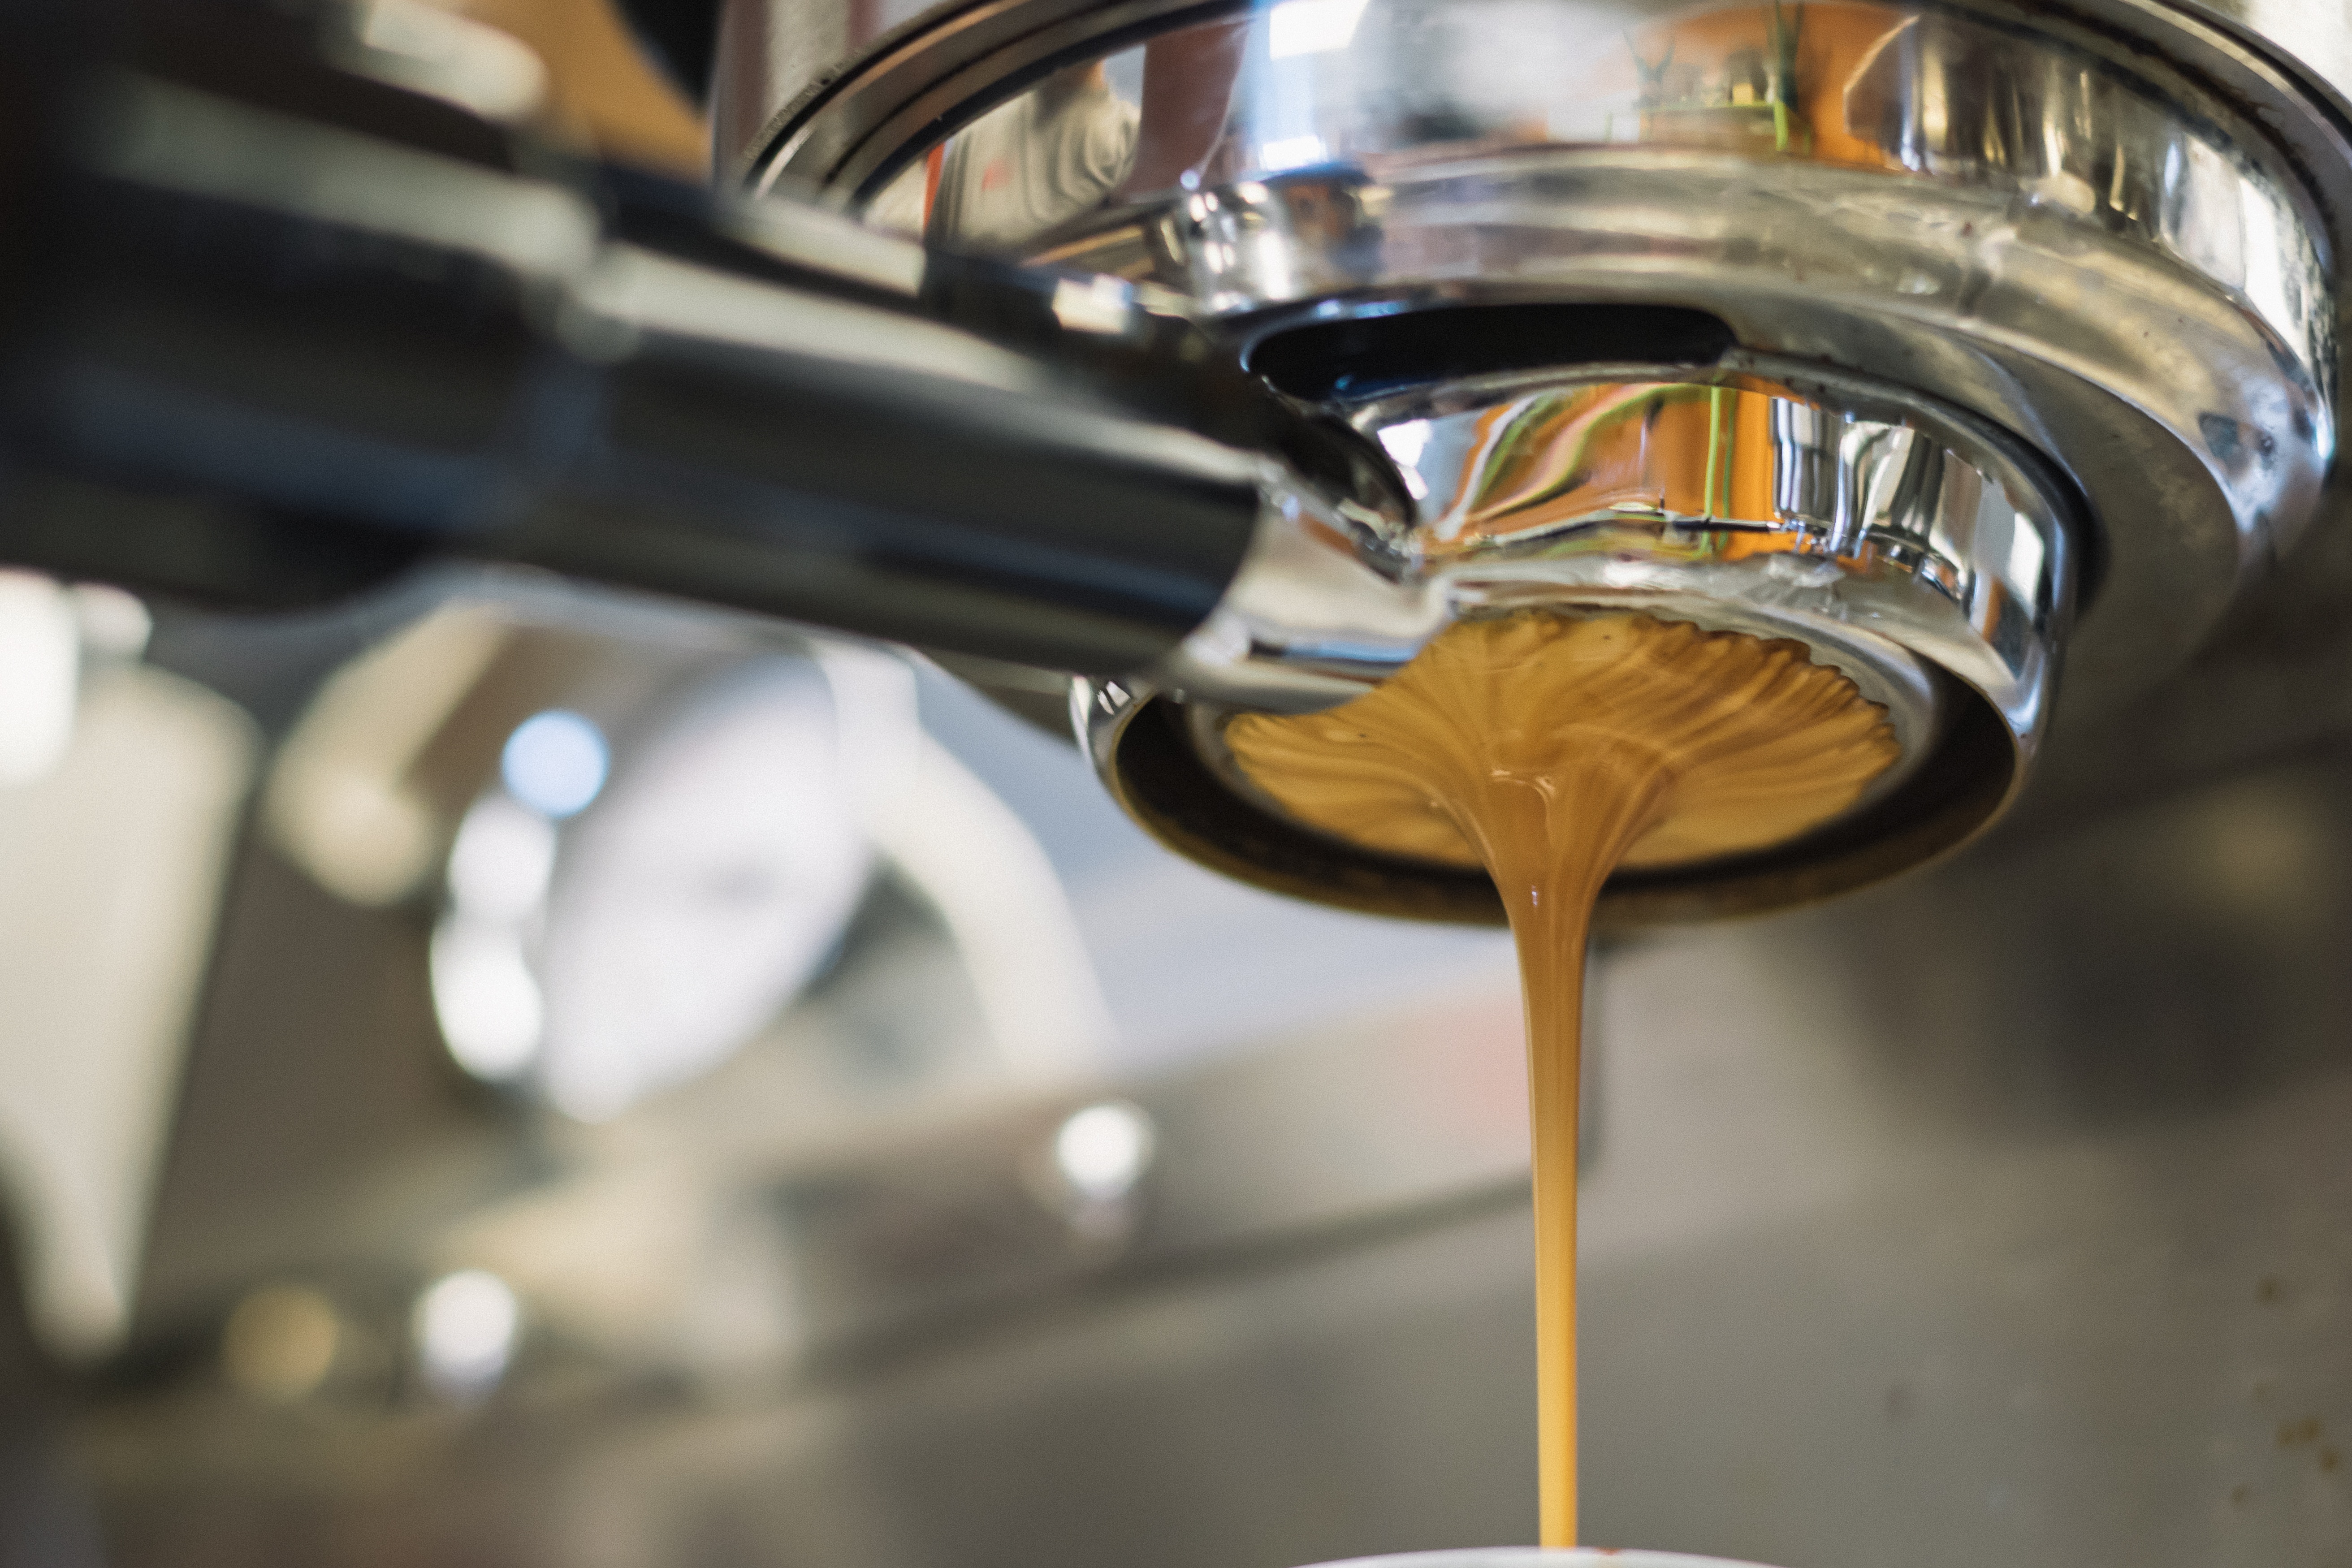 How to Make Espresso at Home Without A Fancy Machine